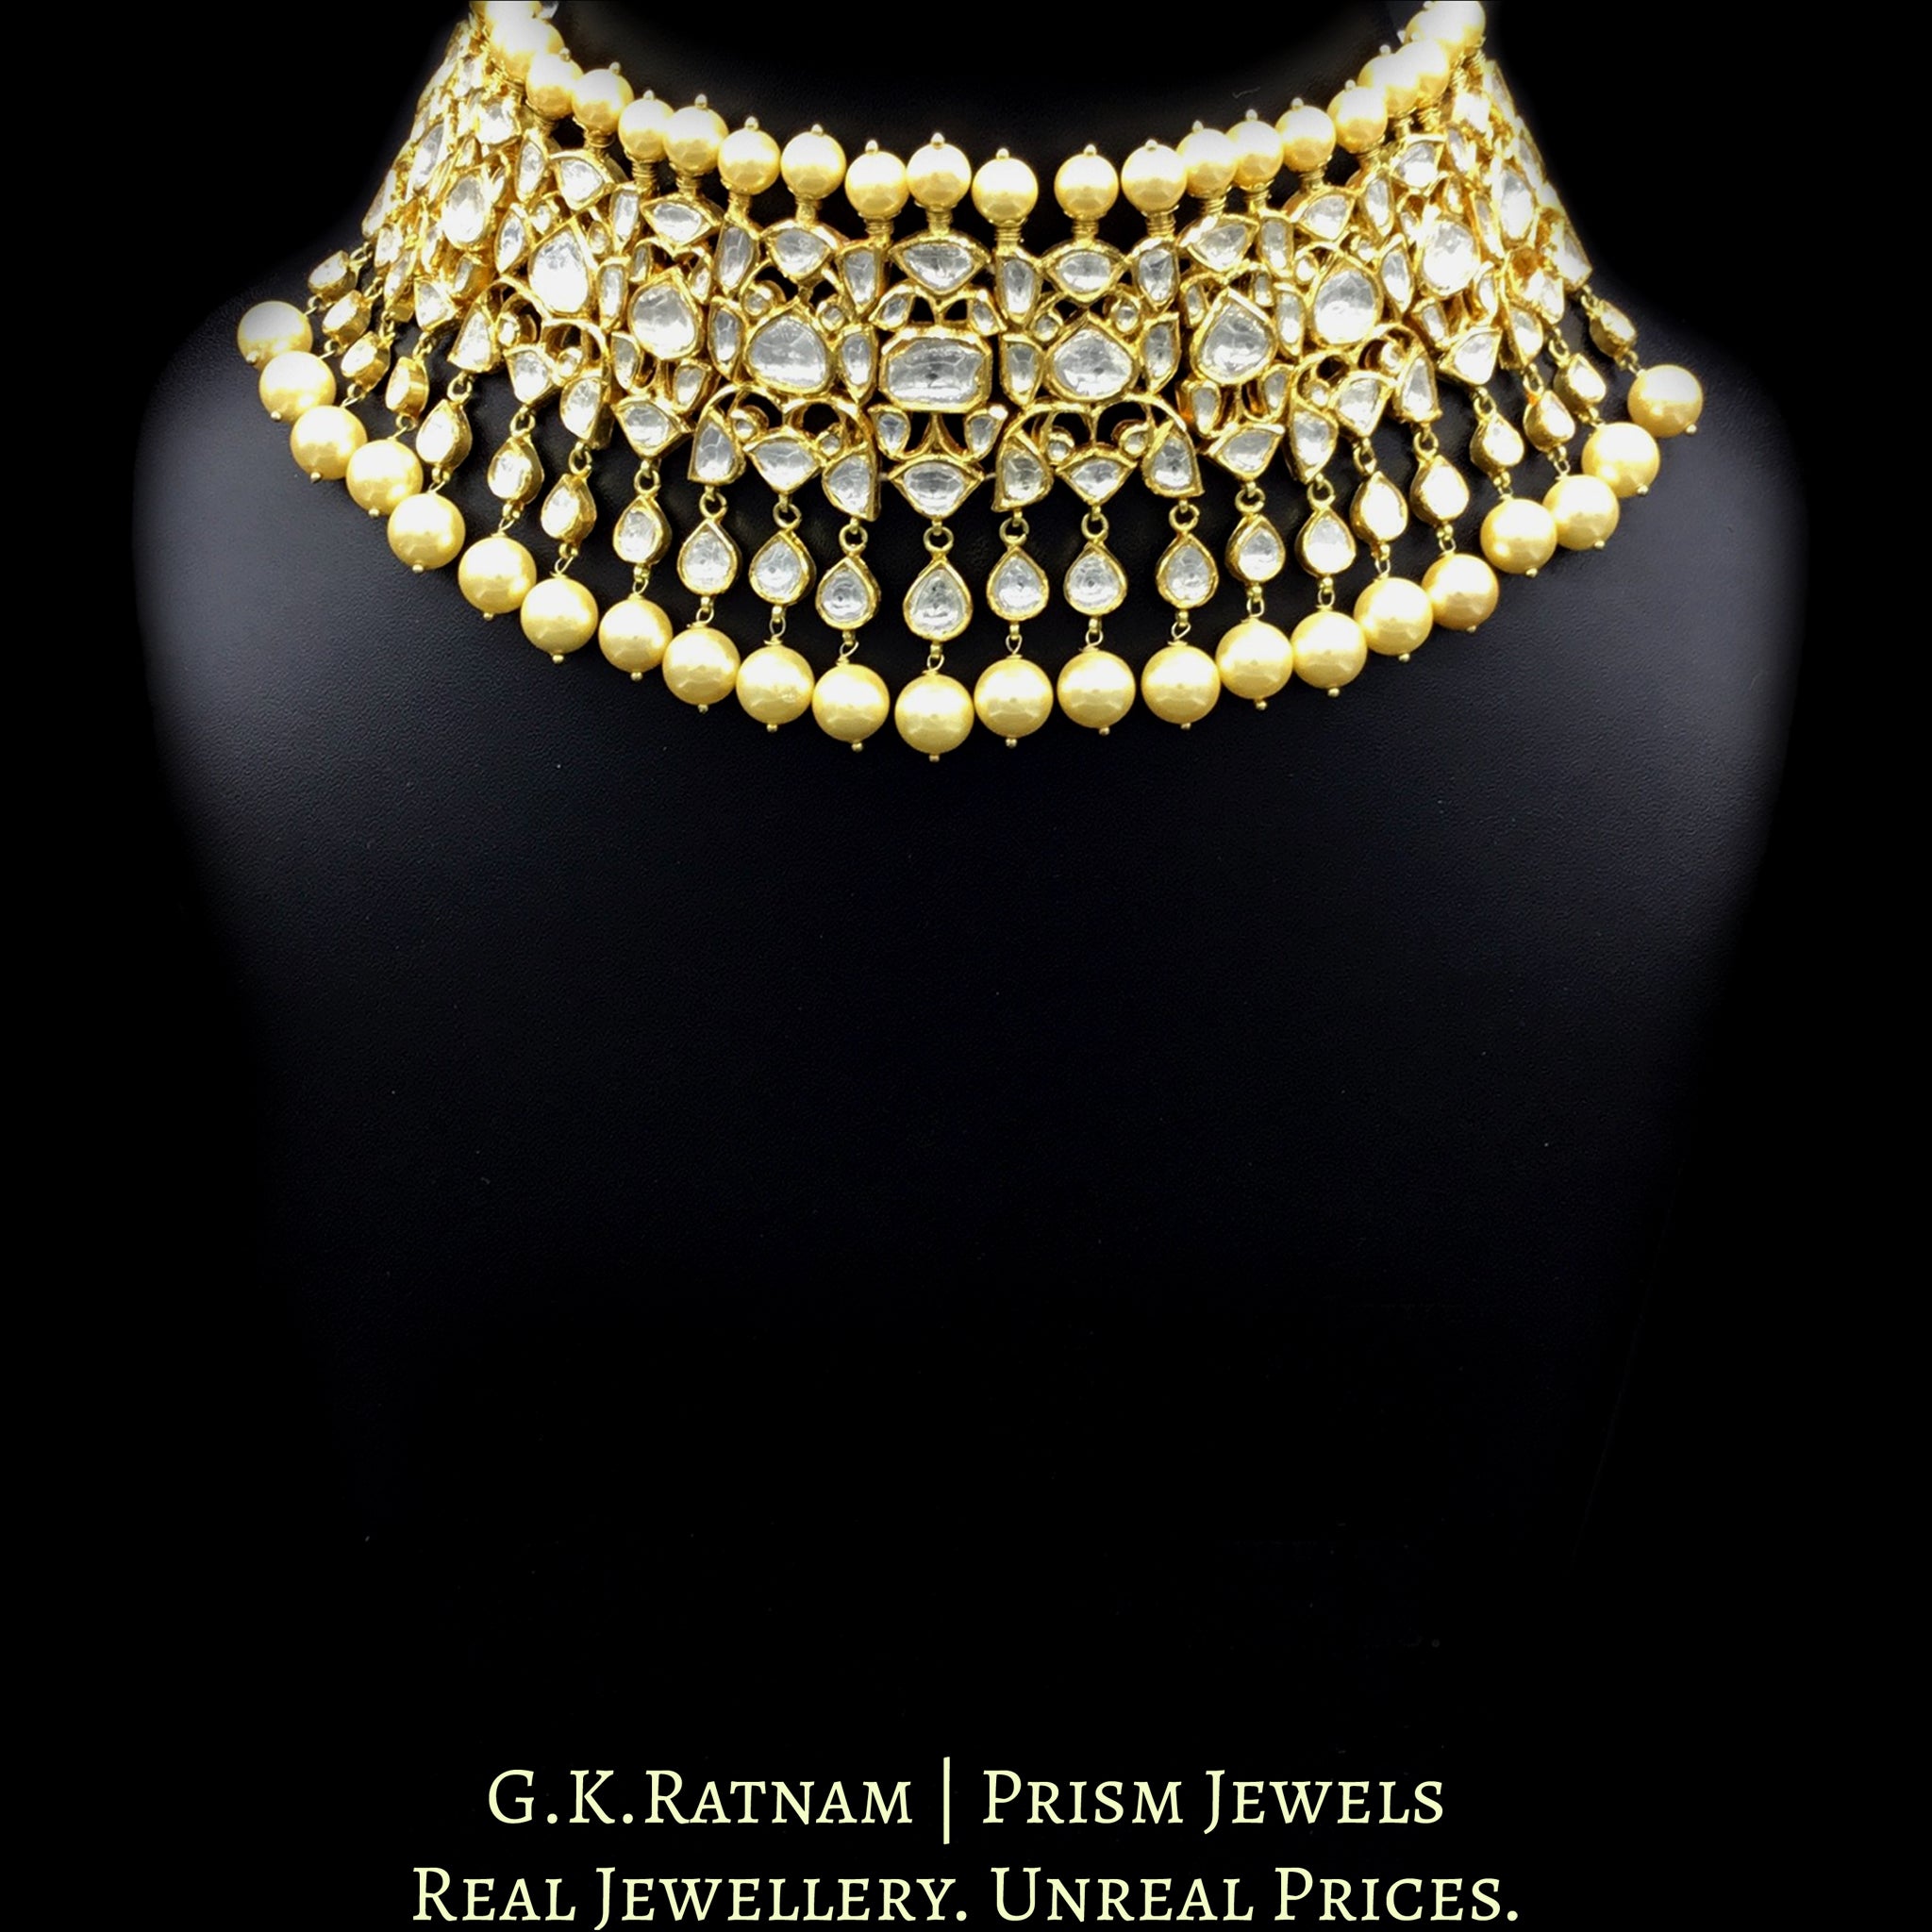 18k Gold and Diamond Polki Choker Necklace Set with glossy pearl hangings - G. K. Ratnam